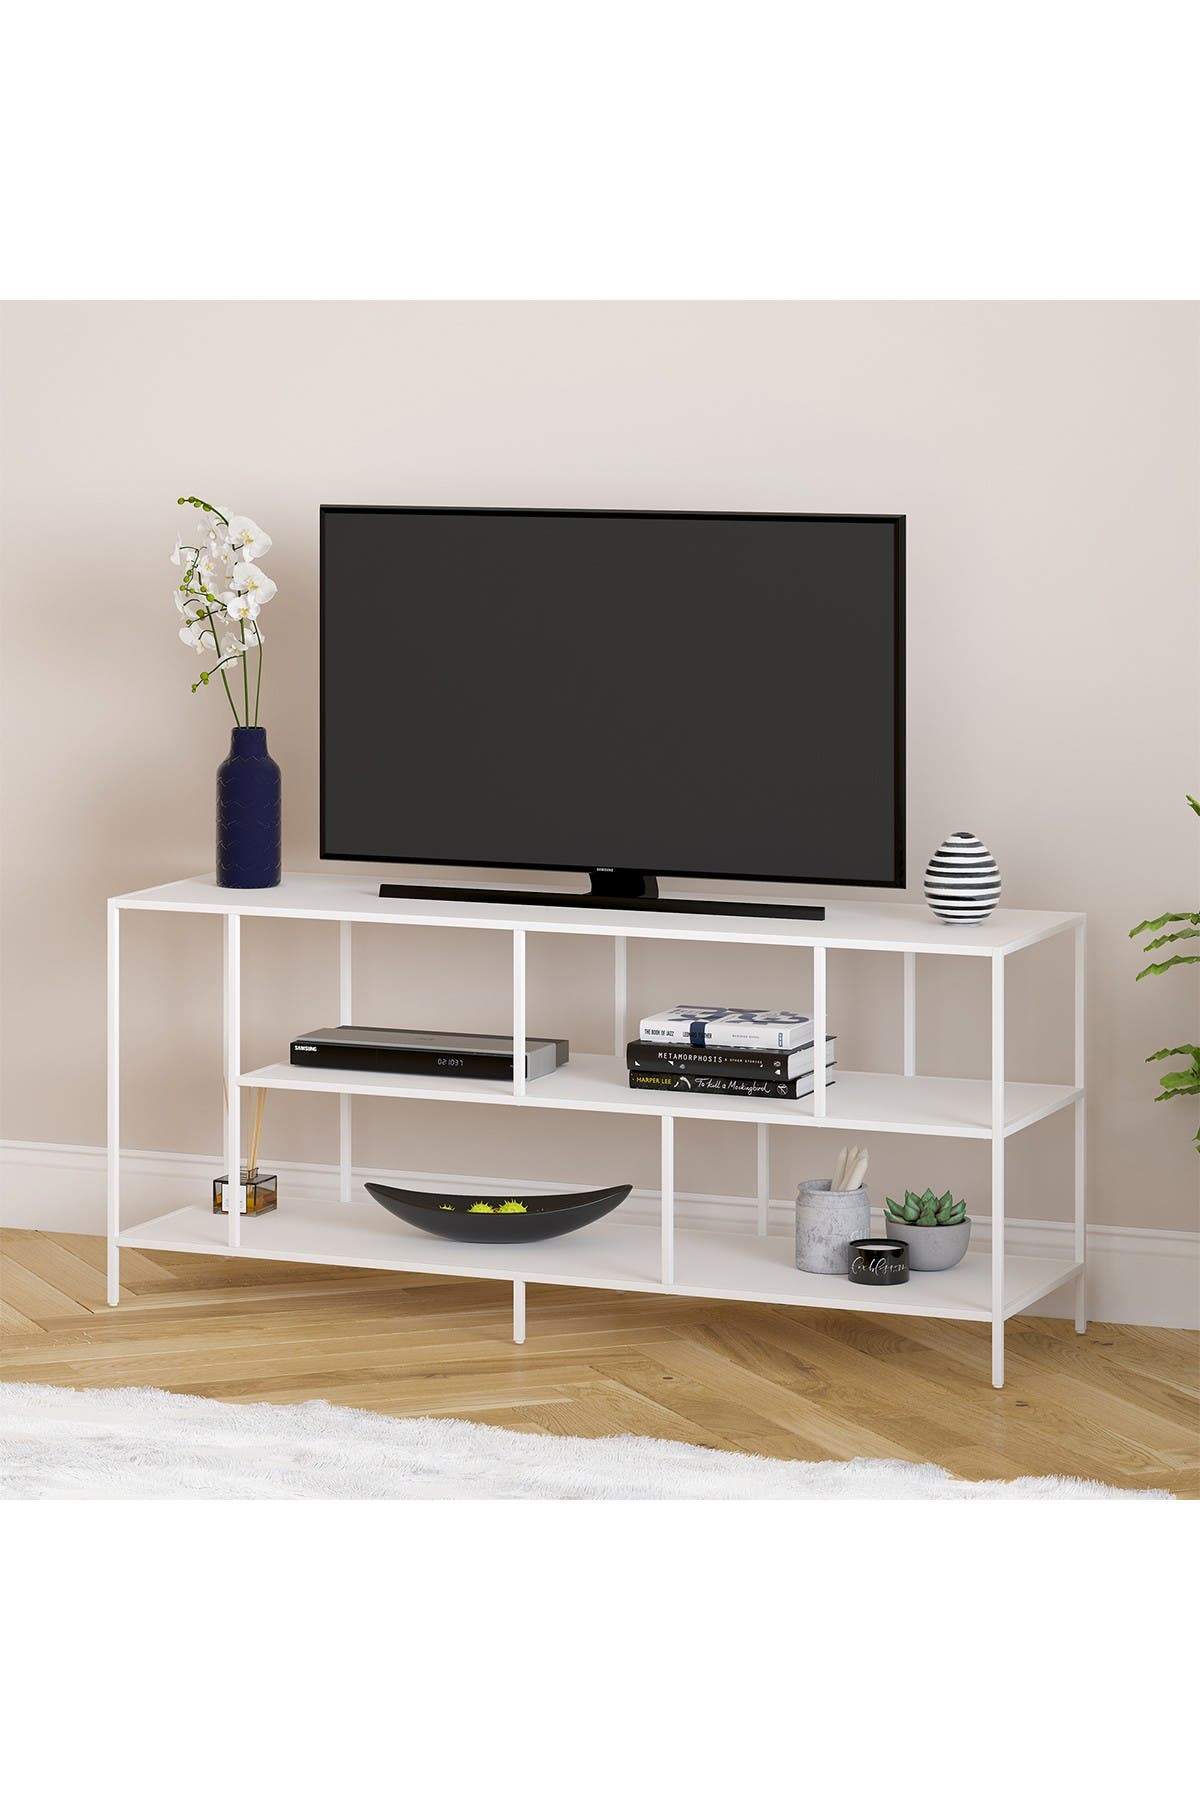 Addison And Lane Winthrop 55" White Tv Stand With Metal Shelves Tv Stand